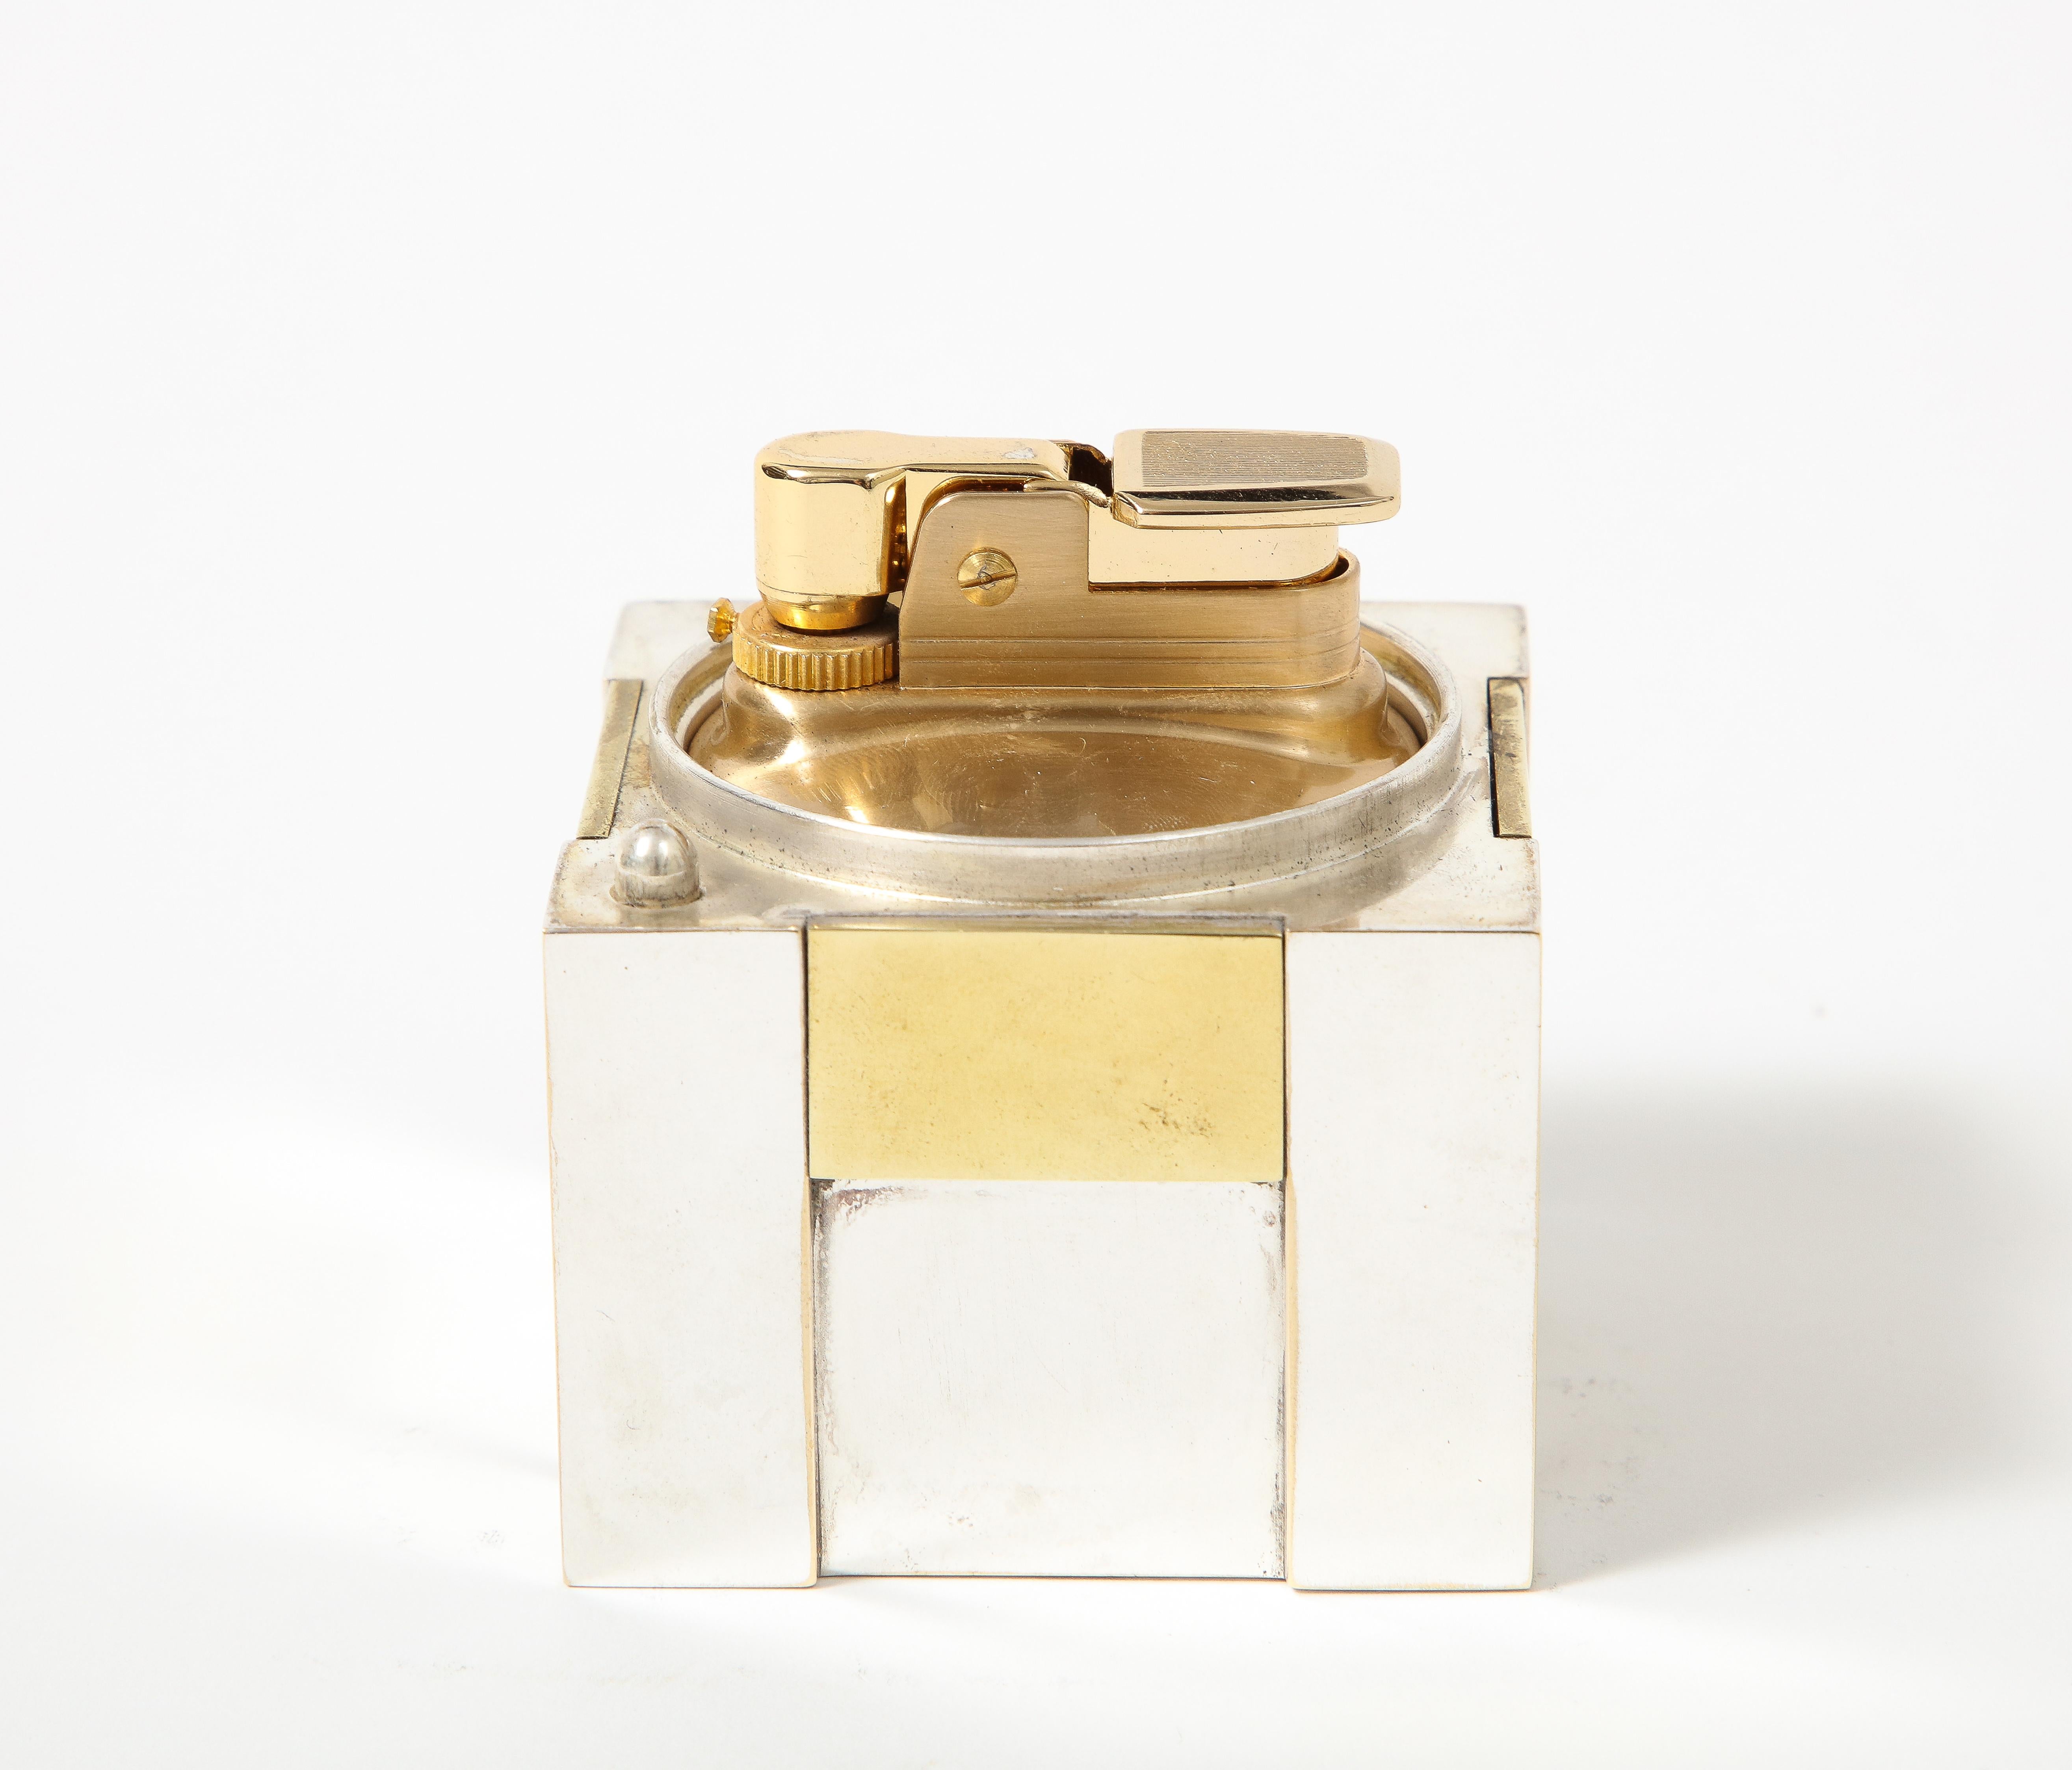 Silver and Brass Lighter, Hermes, Italy, c. 1970 For Sale 5